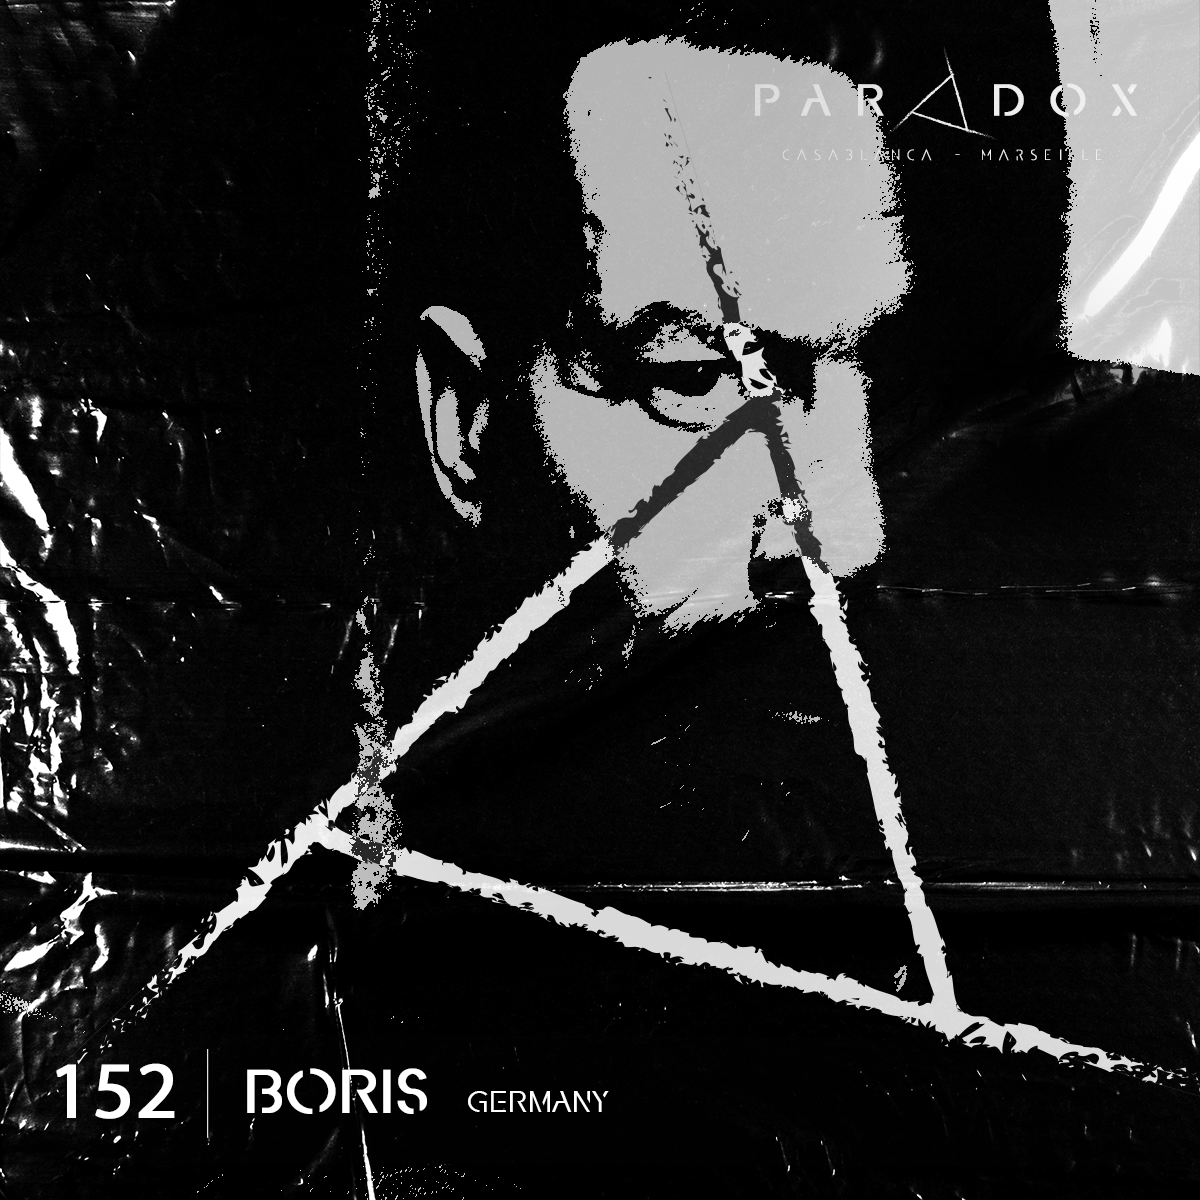 Paradox's techno Podcast number 152 by the artist BORIS